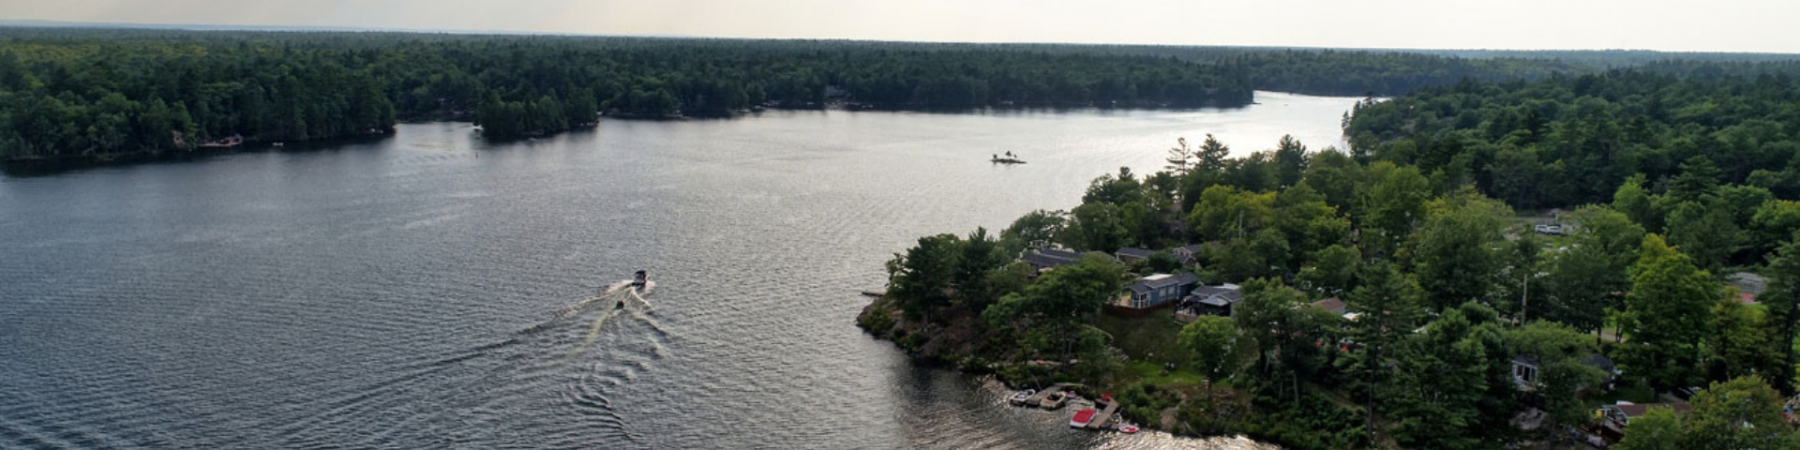 Family Fun in Ontario Cottage Country: Top 4 Destinations